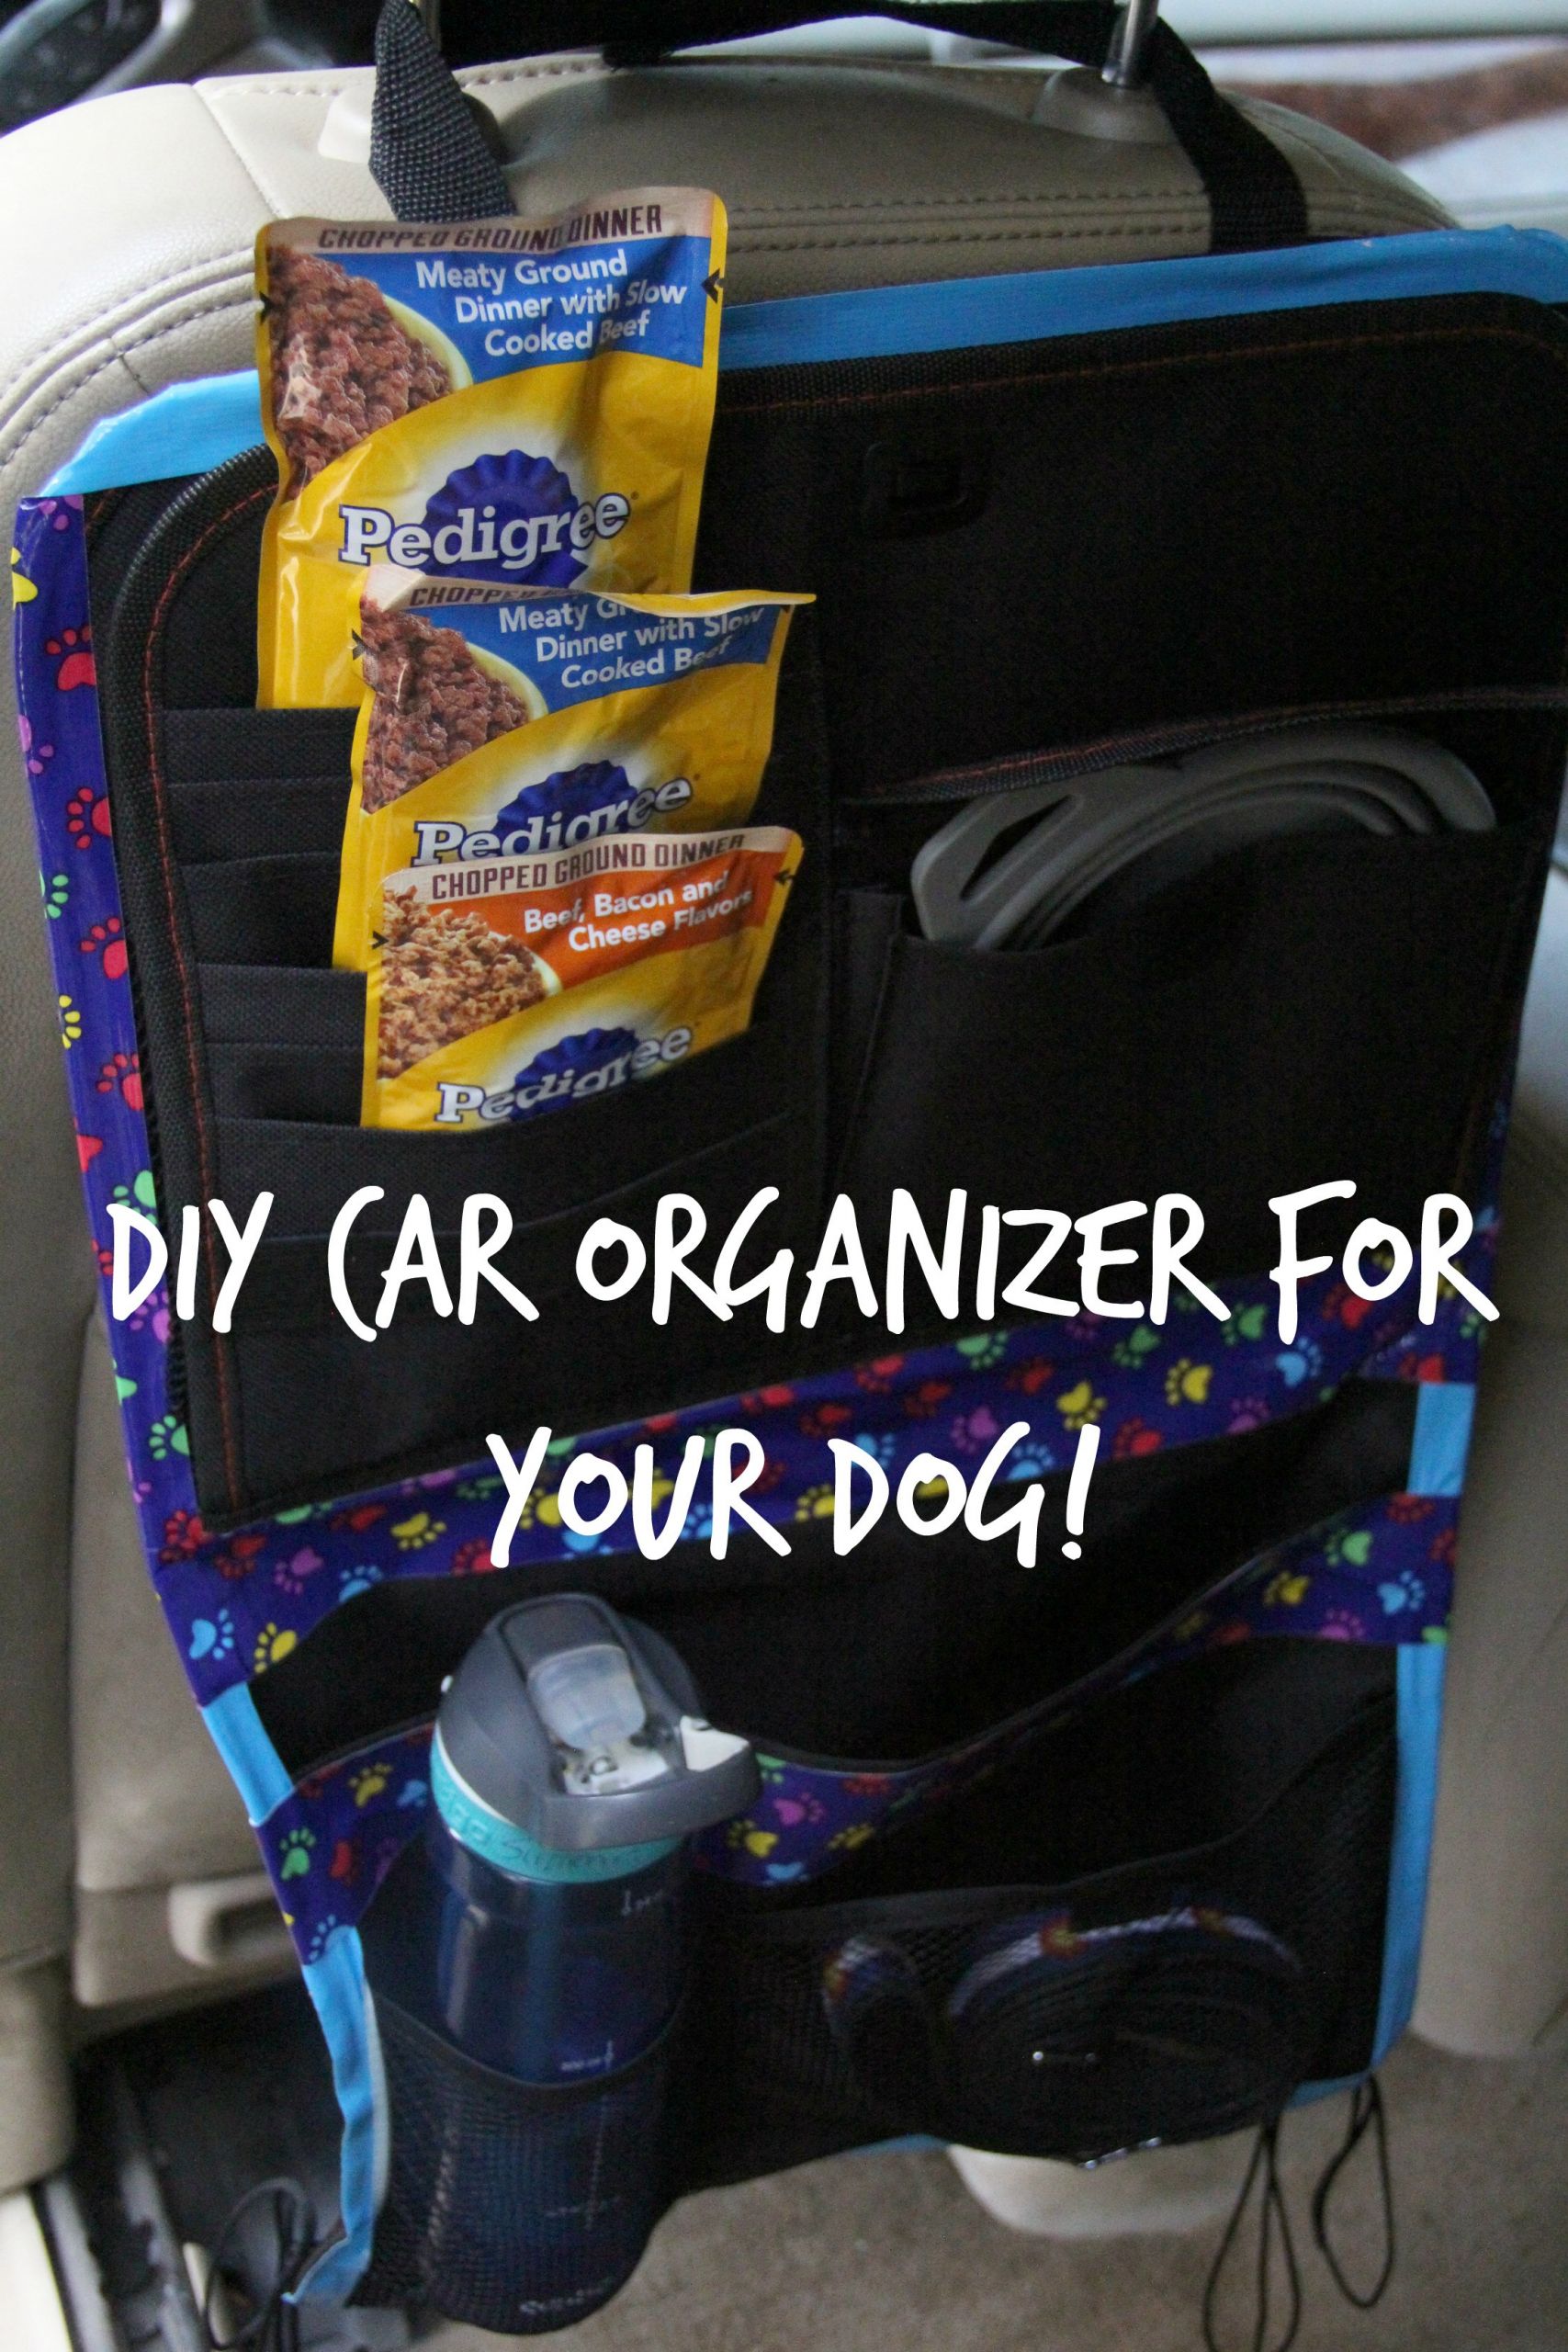 DIY Car Organizers
 Check out this DIY Car organizer for your dog with